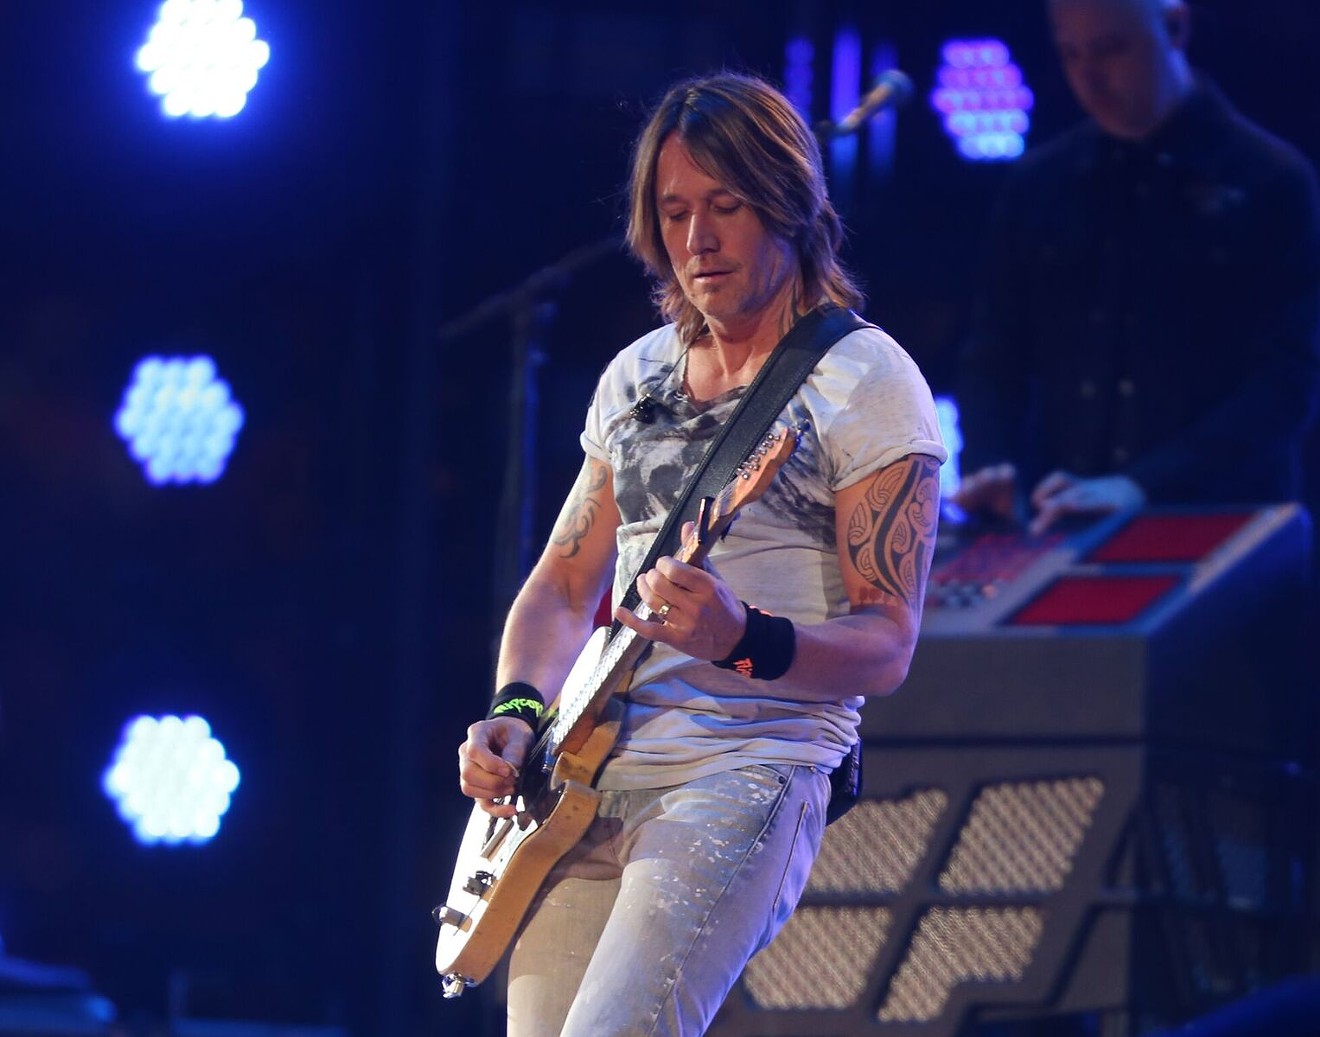 Keith Urban doing what he loves most with his guitar.